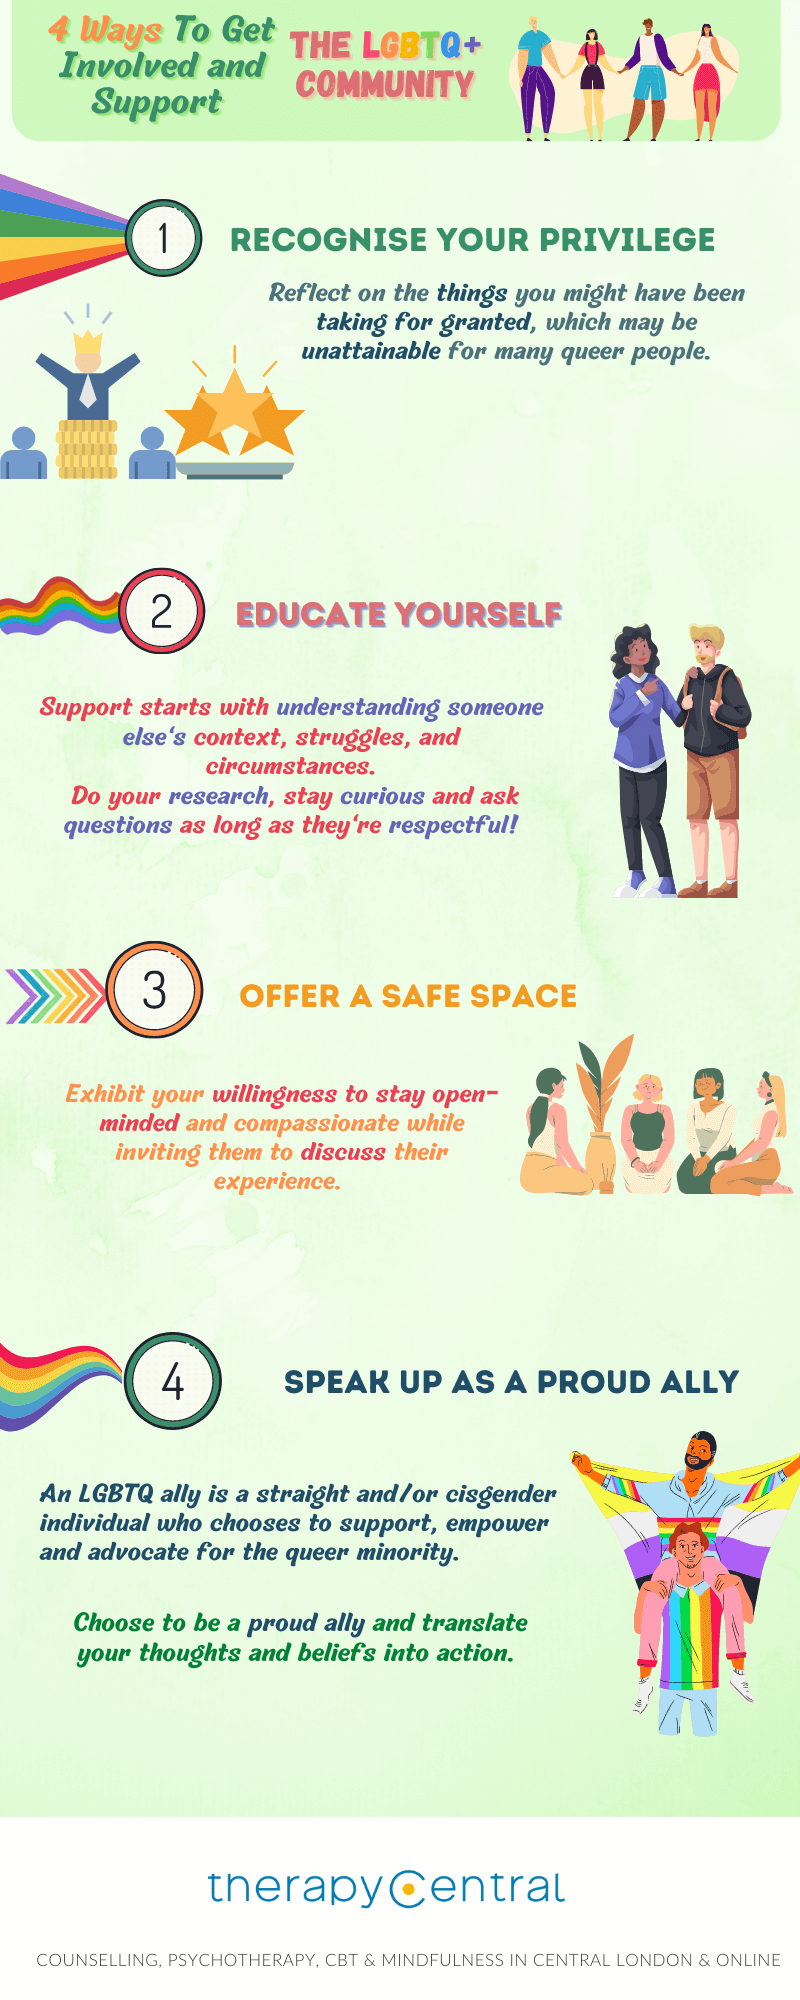 4 Ways To Get Involved and Support The LGBTQ Community